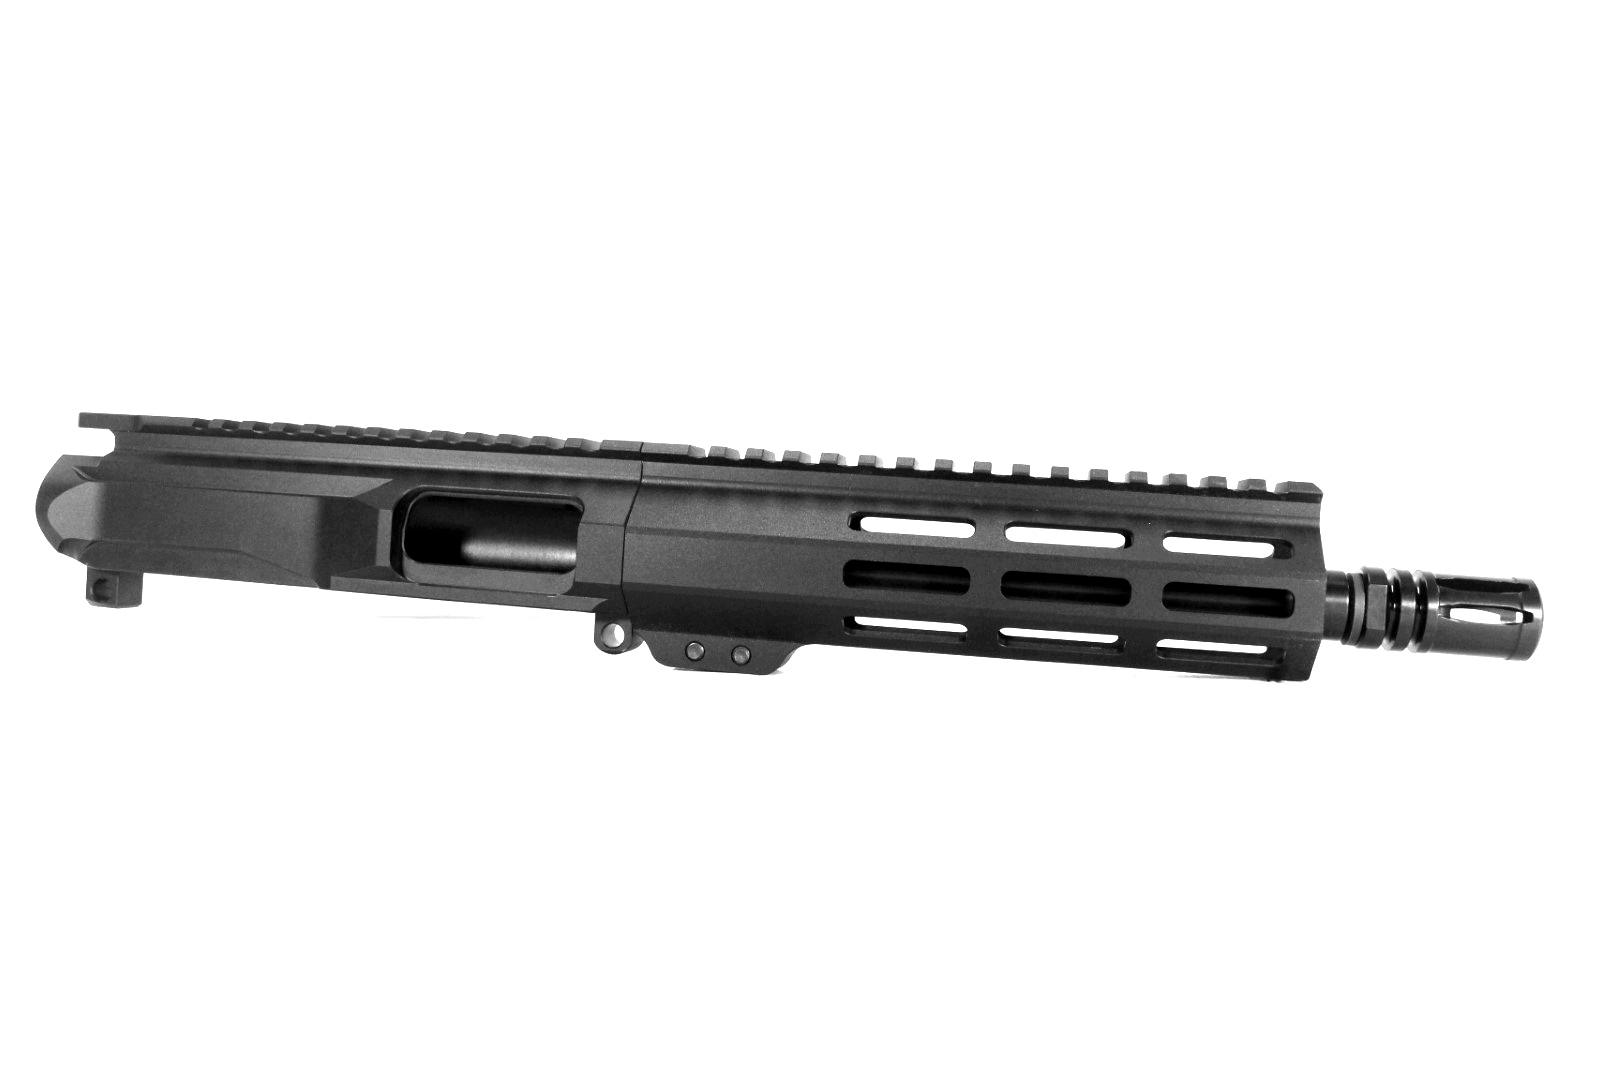 8.5 inch 10mm PCC Upper | Made in the USA